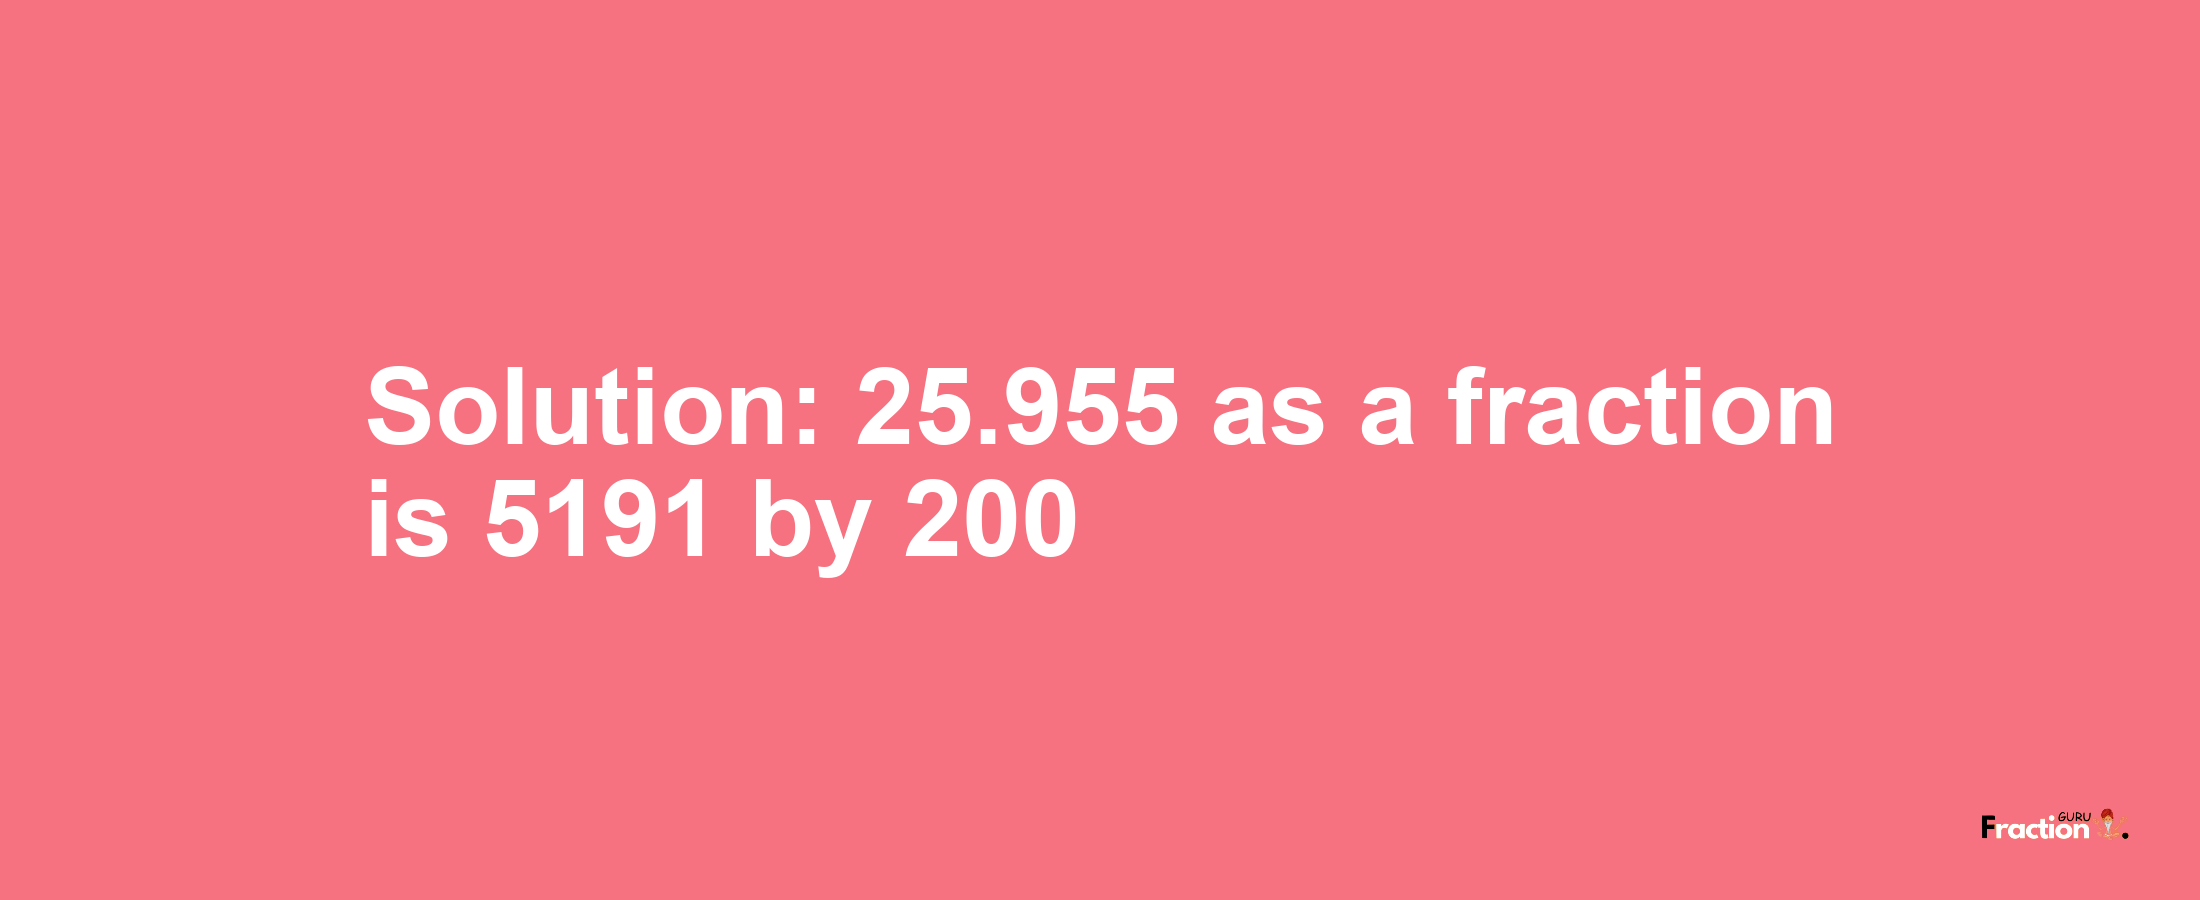 Solution:25.955 as a fraction is 5191/200